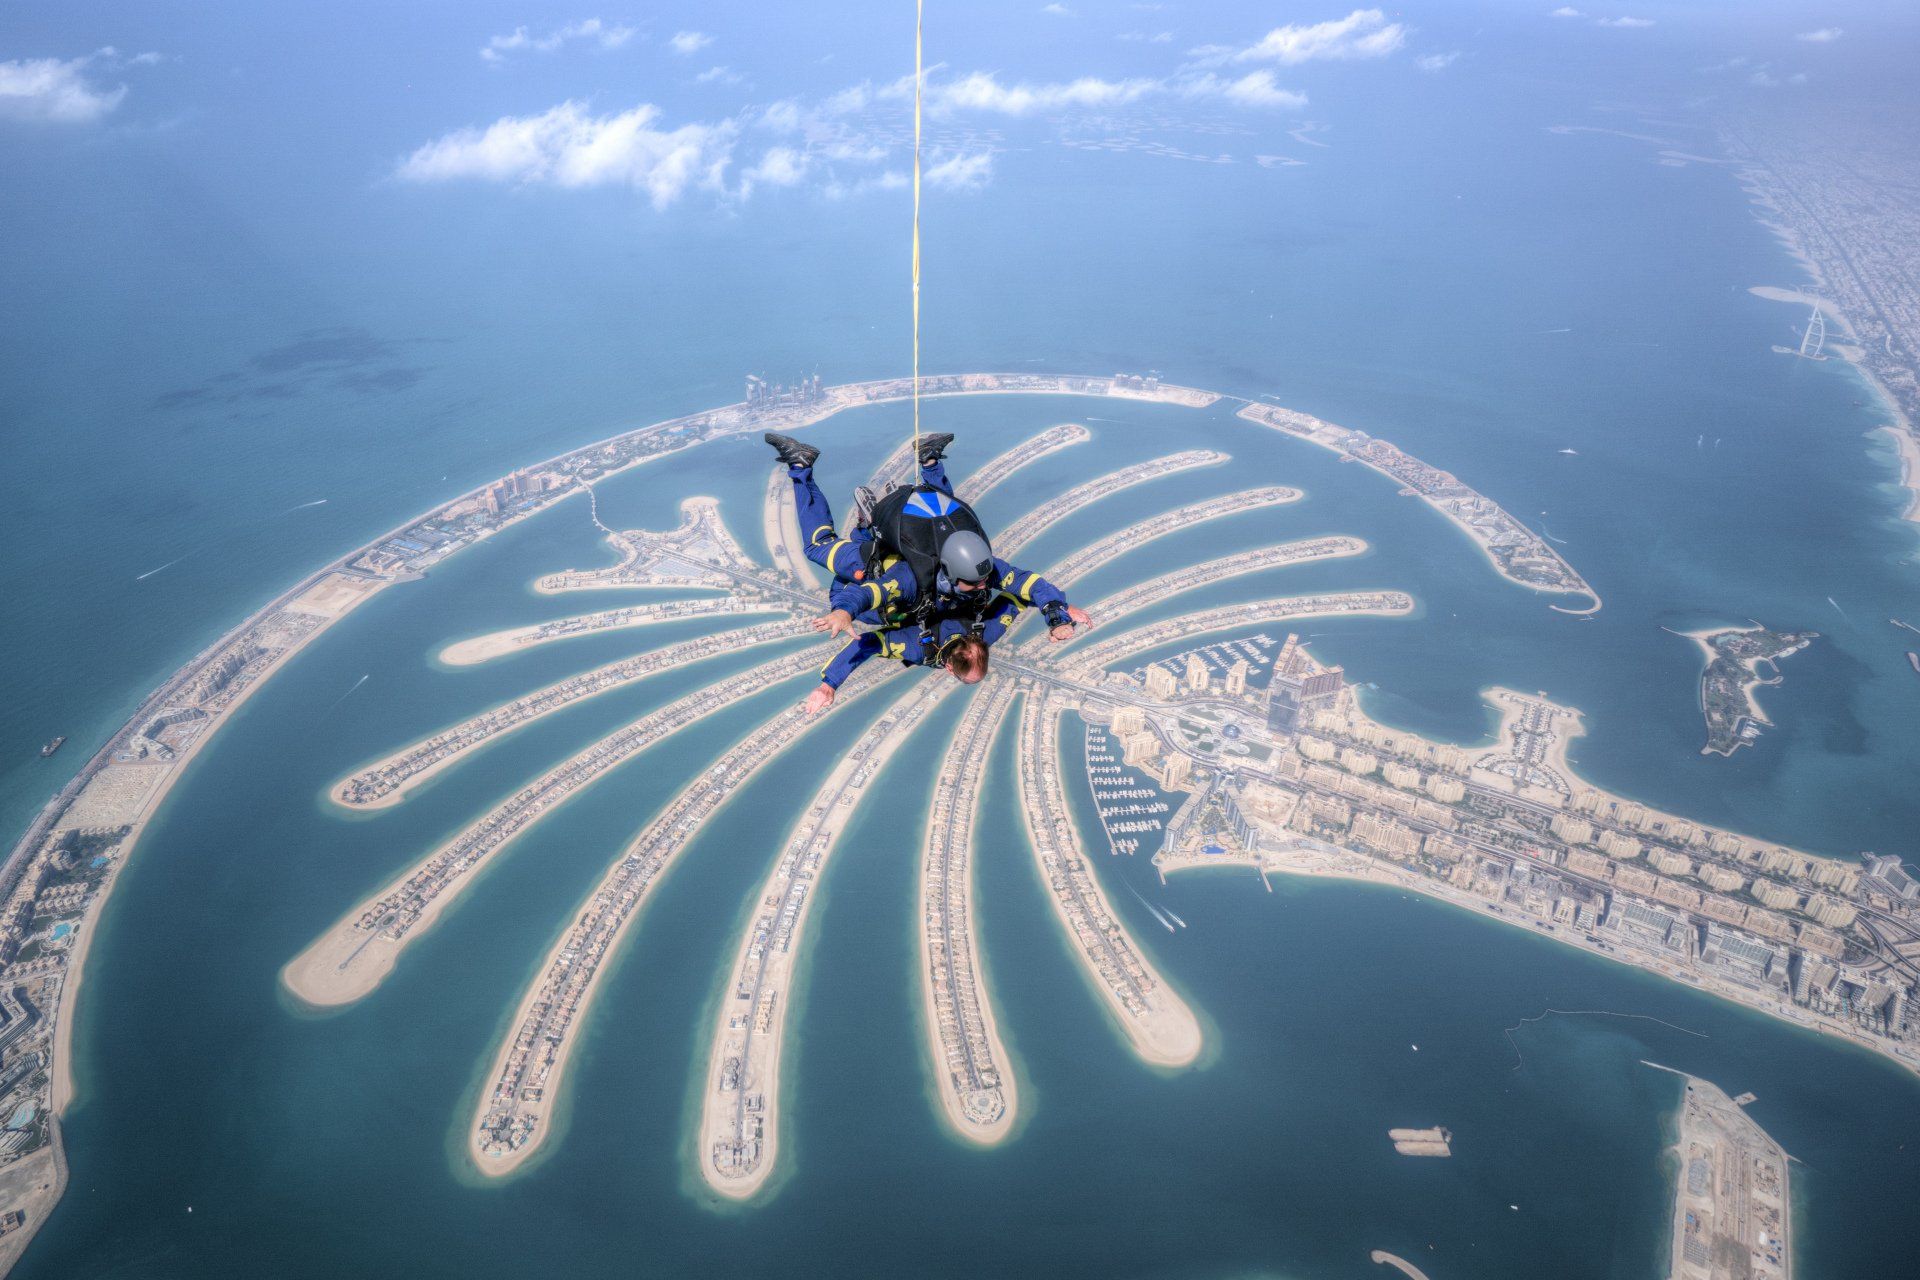 Fastest time to tandem skydive all seven continents: James C. Wigginton and Thomas J. Noonan lll se